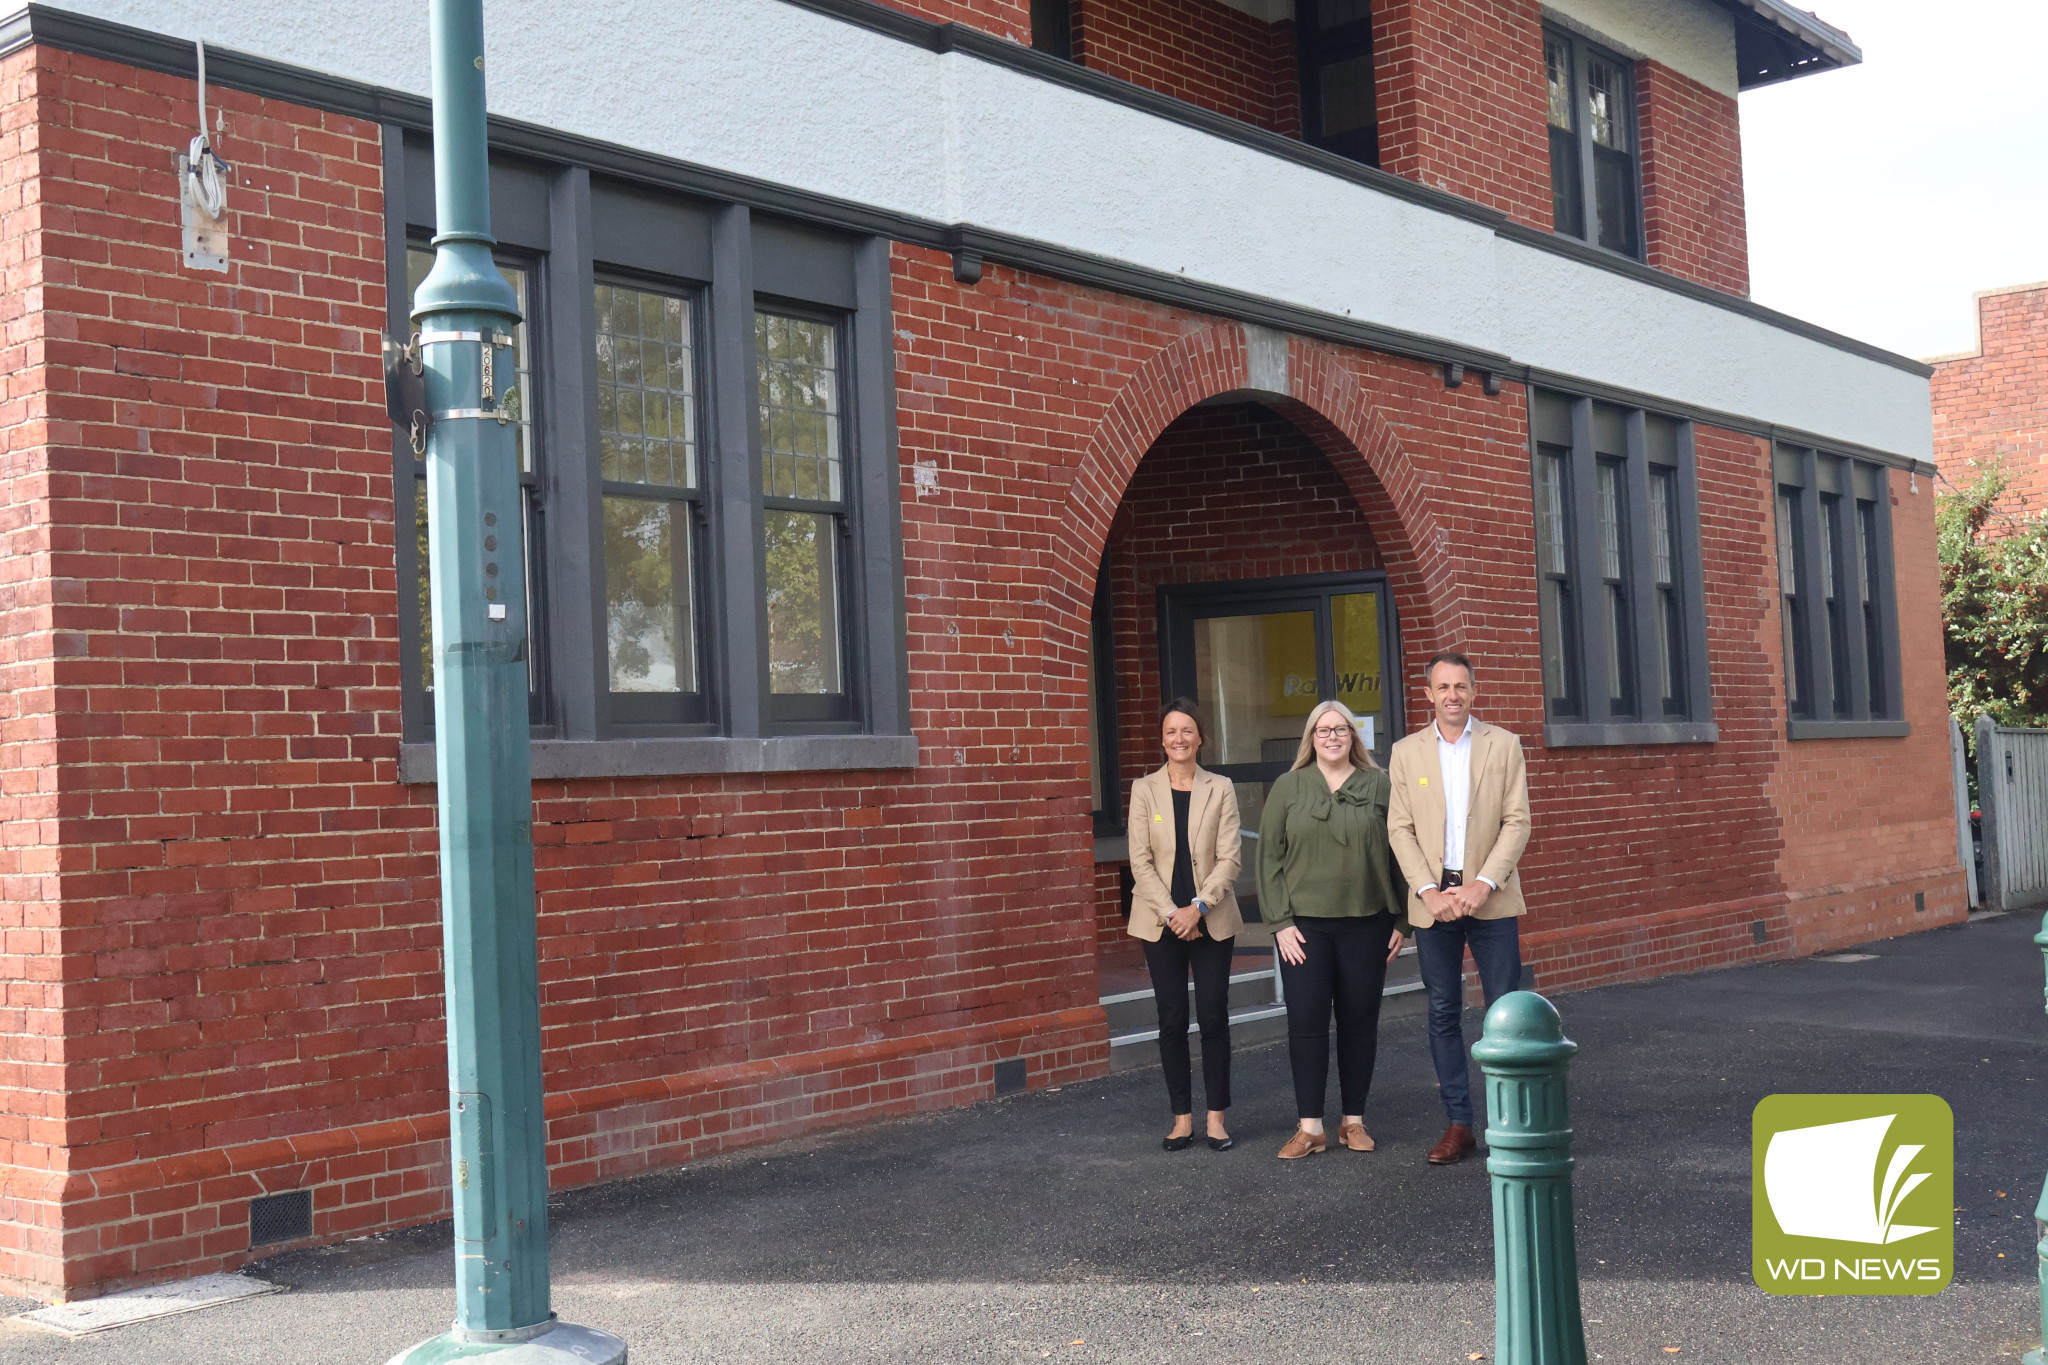 Proud of the heritage: Ray White directors Davinia Pickles, Chloe Winzar and Alistair Tune are thrilled with their new location, which has been restored to its former glory.